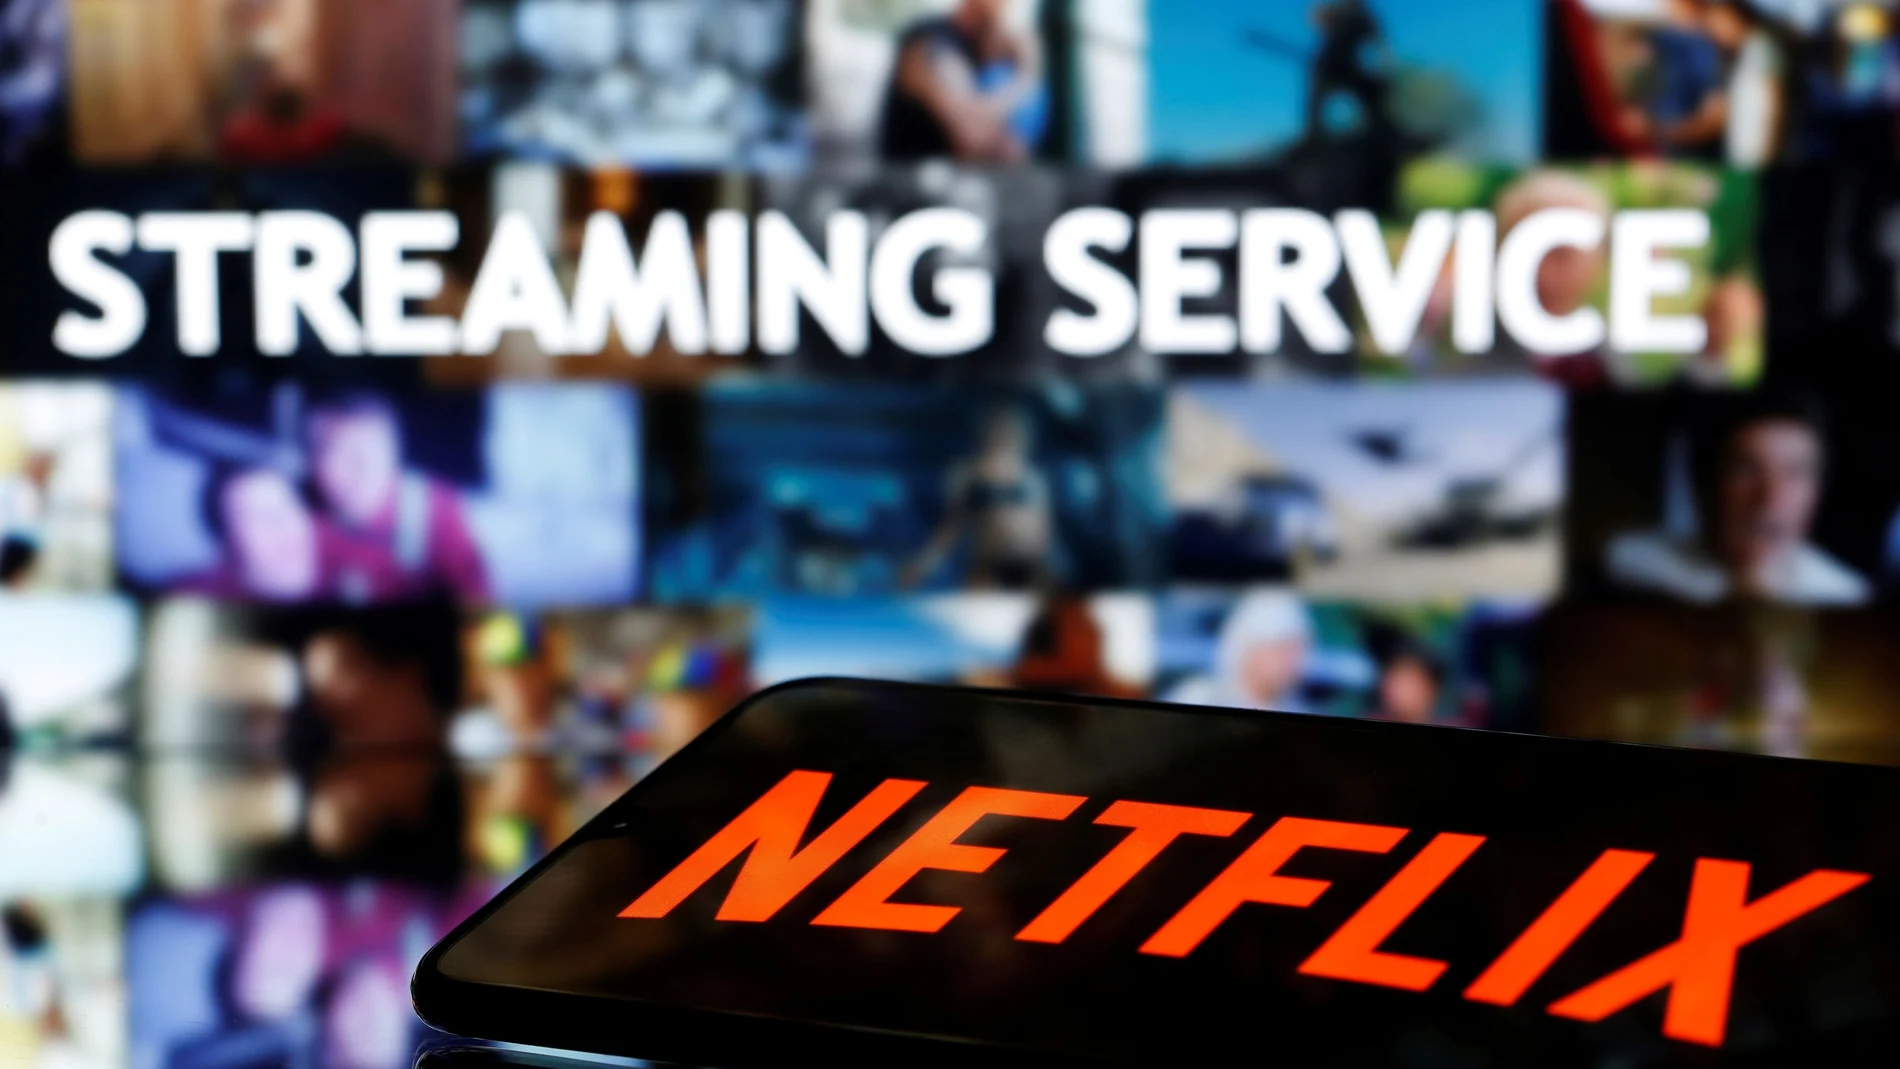 FILE PHOTO: A smartphone with the Netflix logo lies in front of displayed "Streaming service" words in this illustration